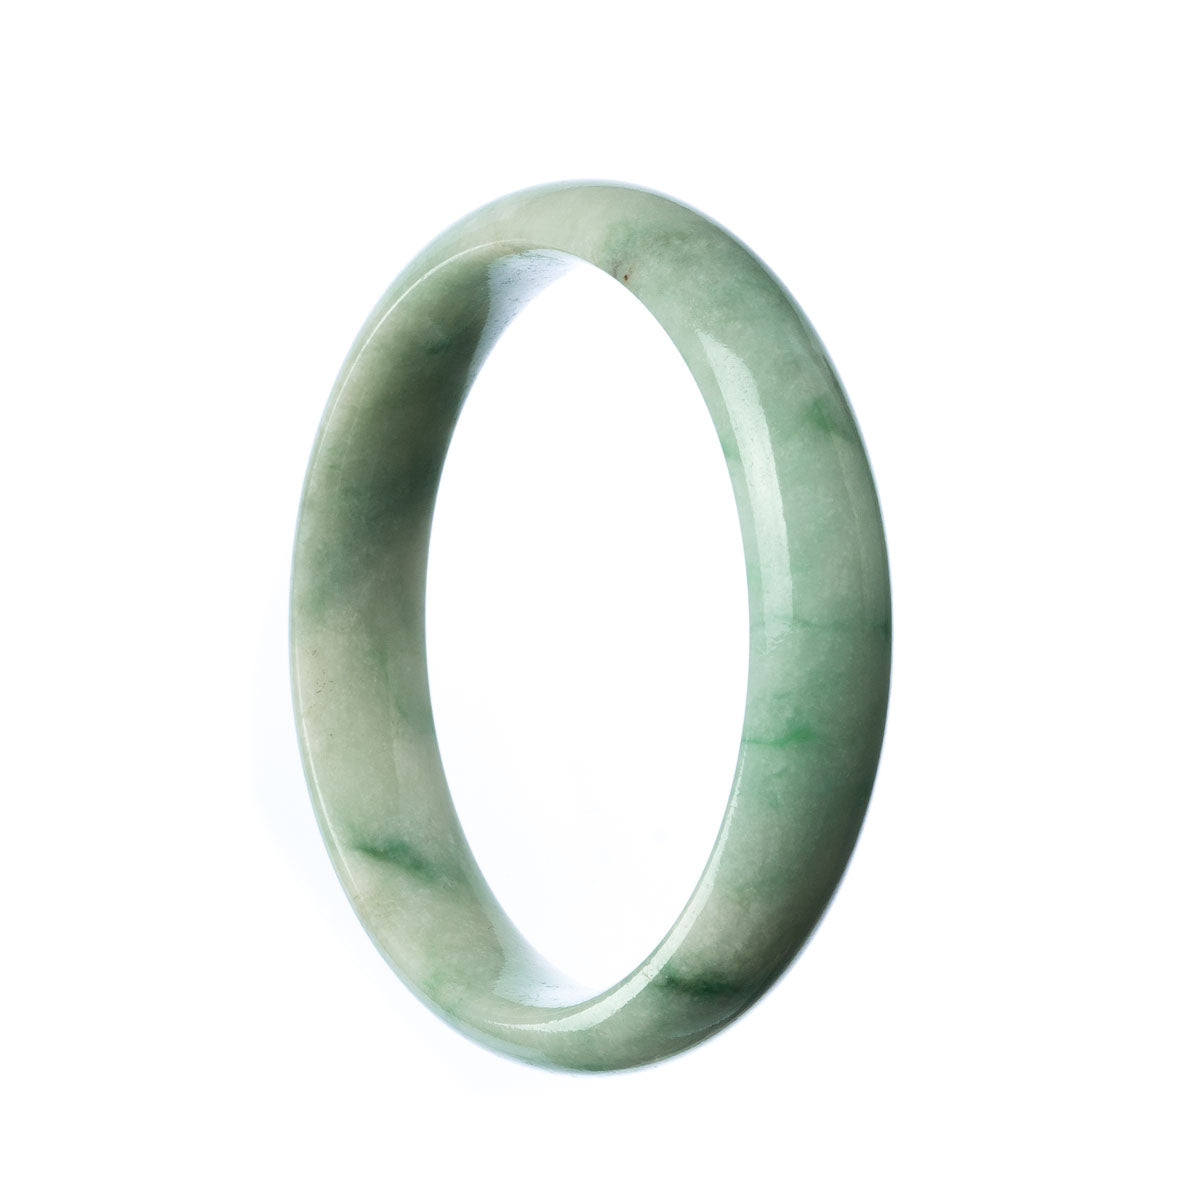 A pale green jade bangle with a half moon design, measuring 57mm in size. Exquisite and genuine Grade A jade from MAYS GEMS.